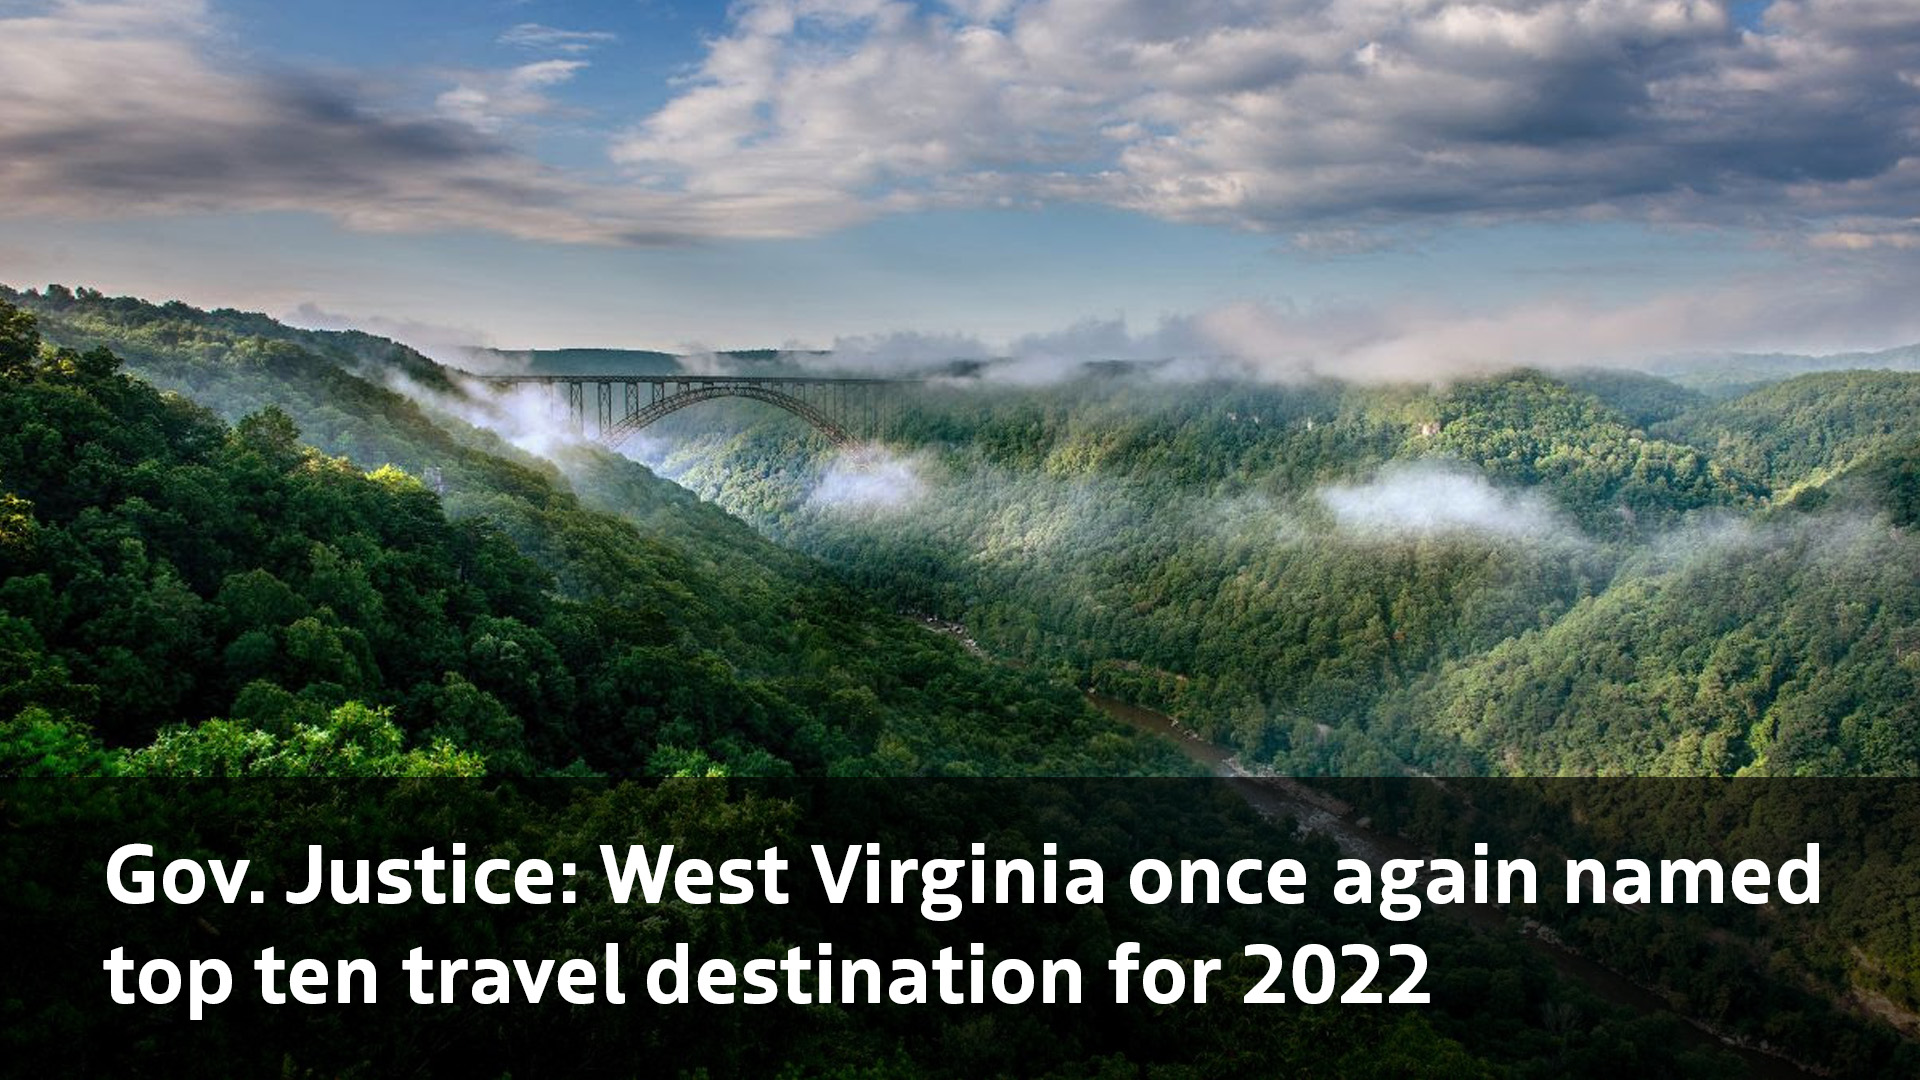 West Virginia once again named top ten travel destination for 2022